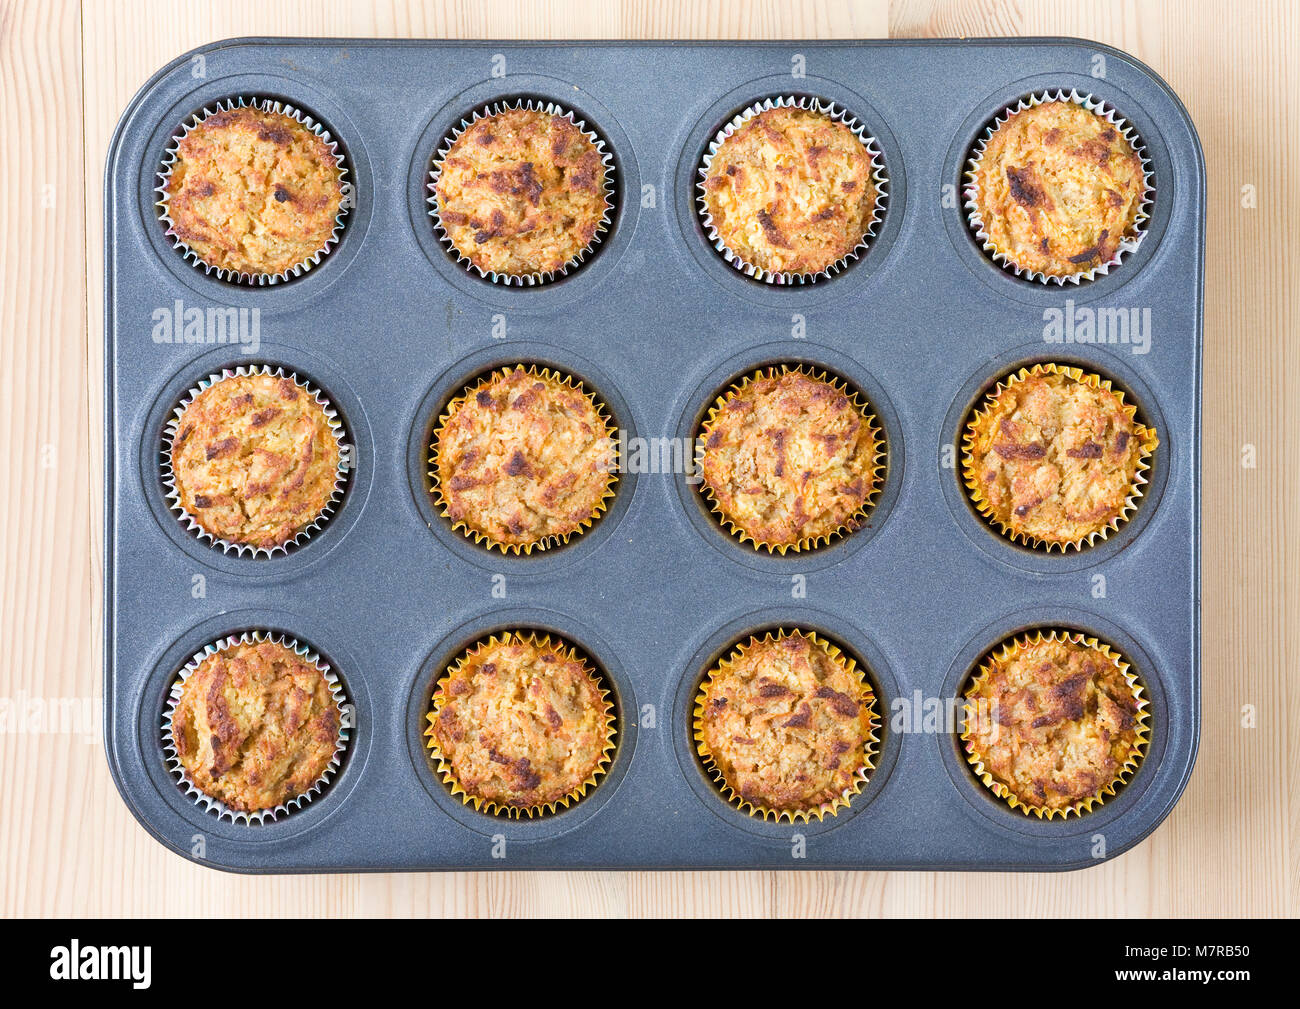 Homemade Carrot and Coconut Muffins. Stock Photo